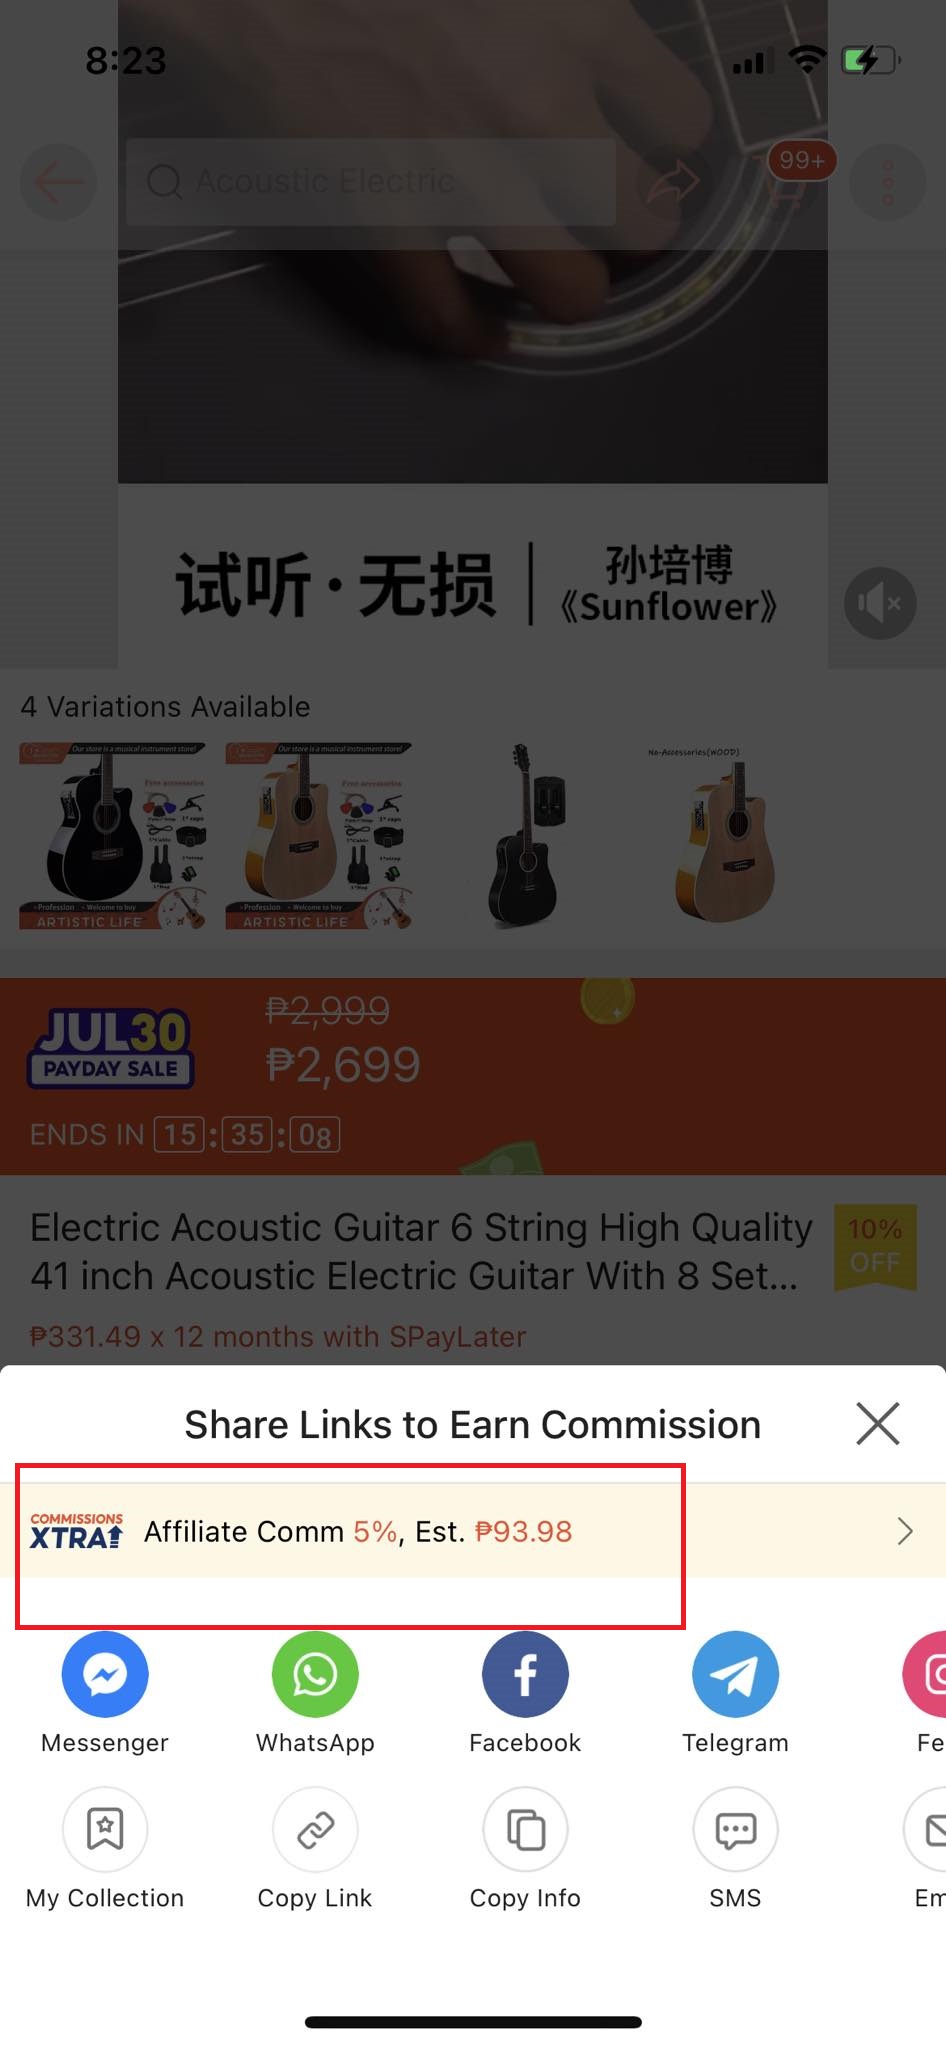 How To Become a Shopee Affiliate (Earn Money by Sharing Links)